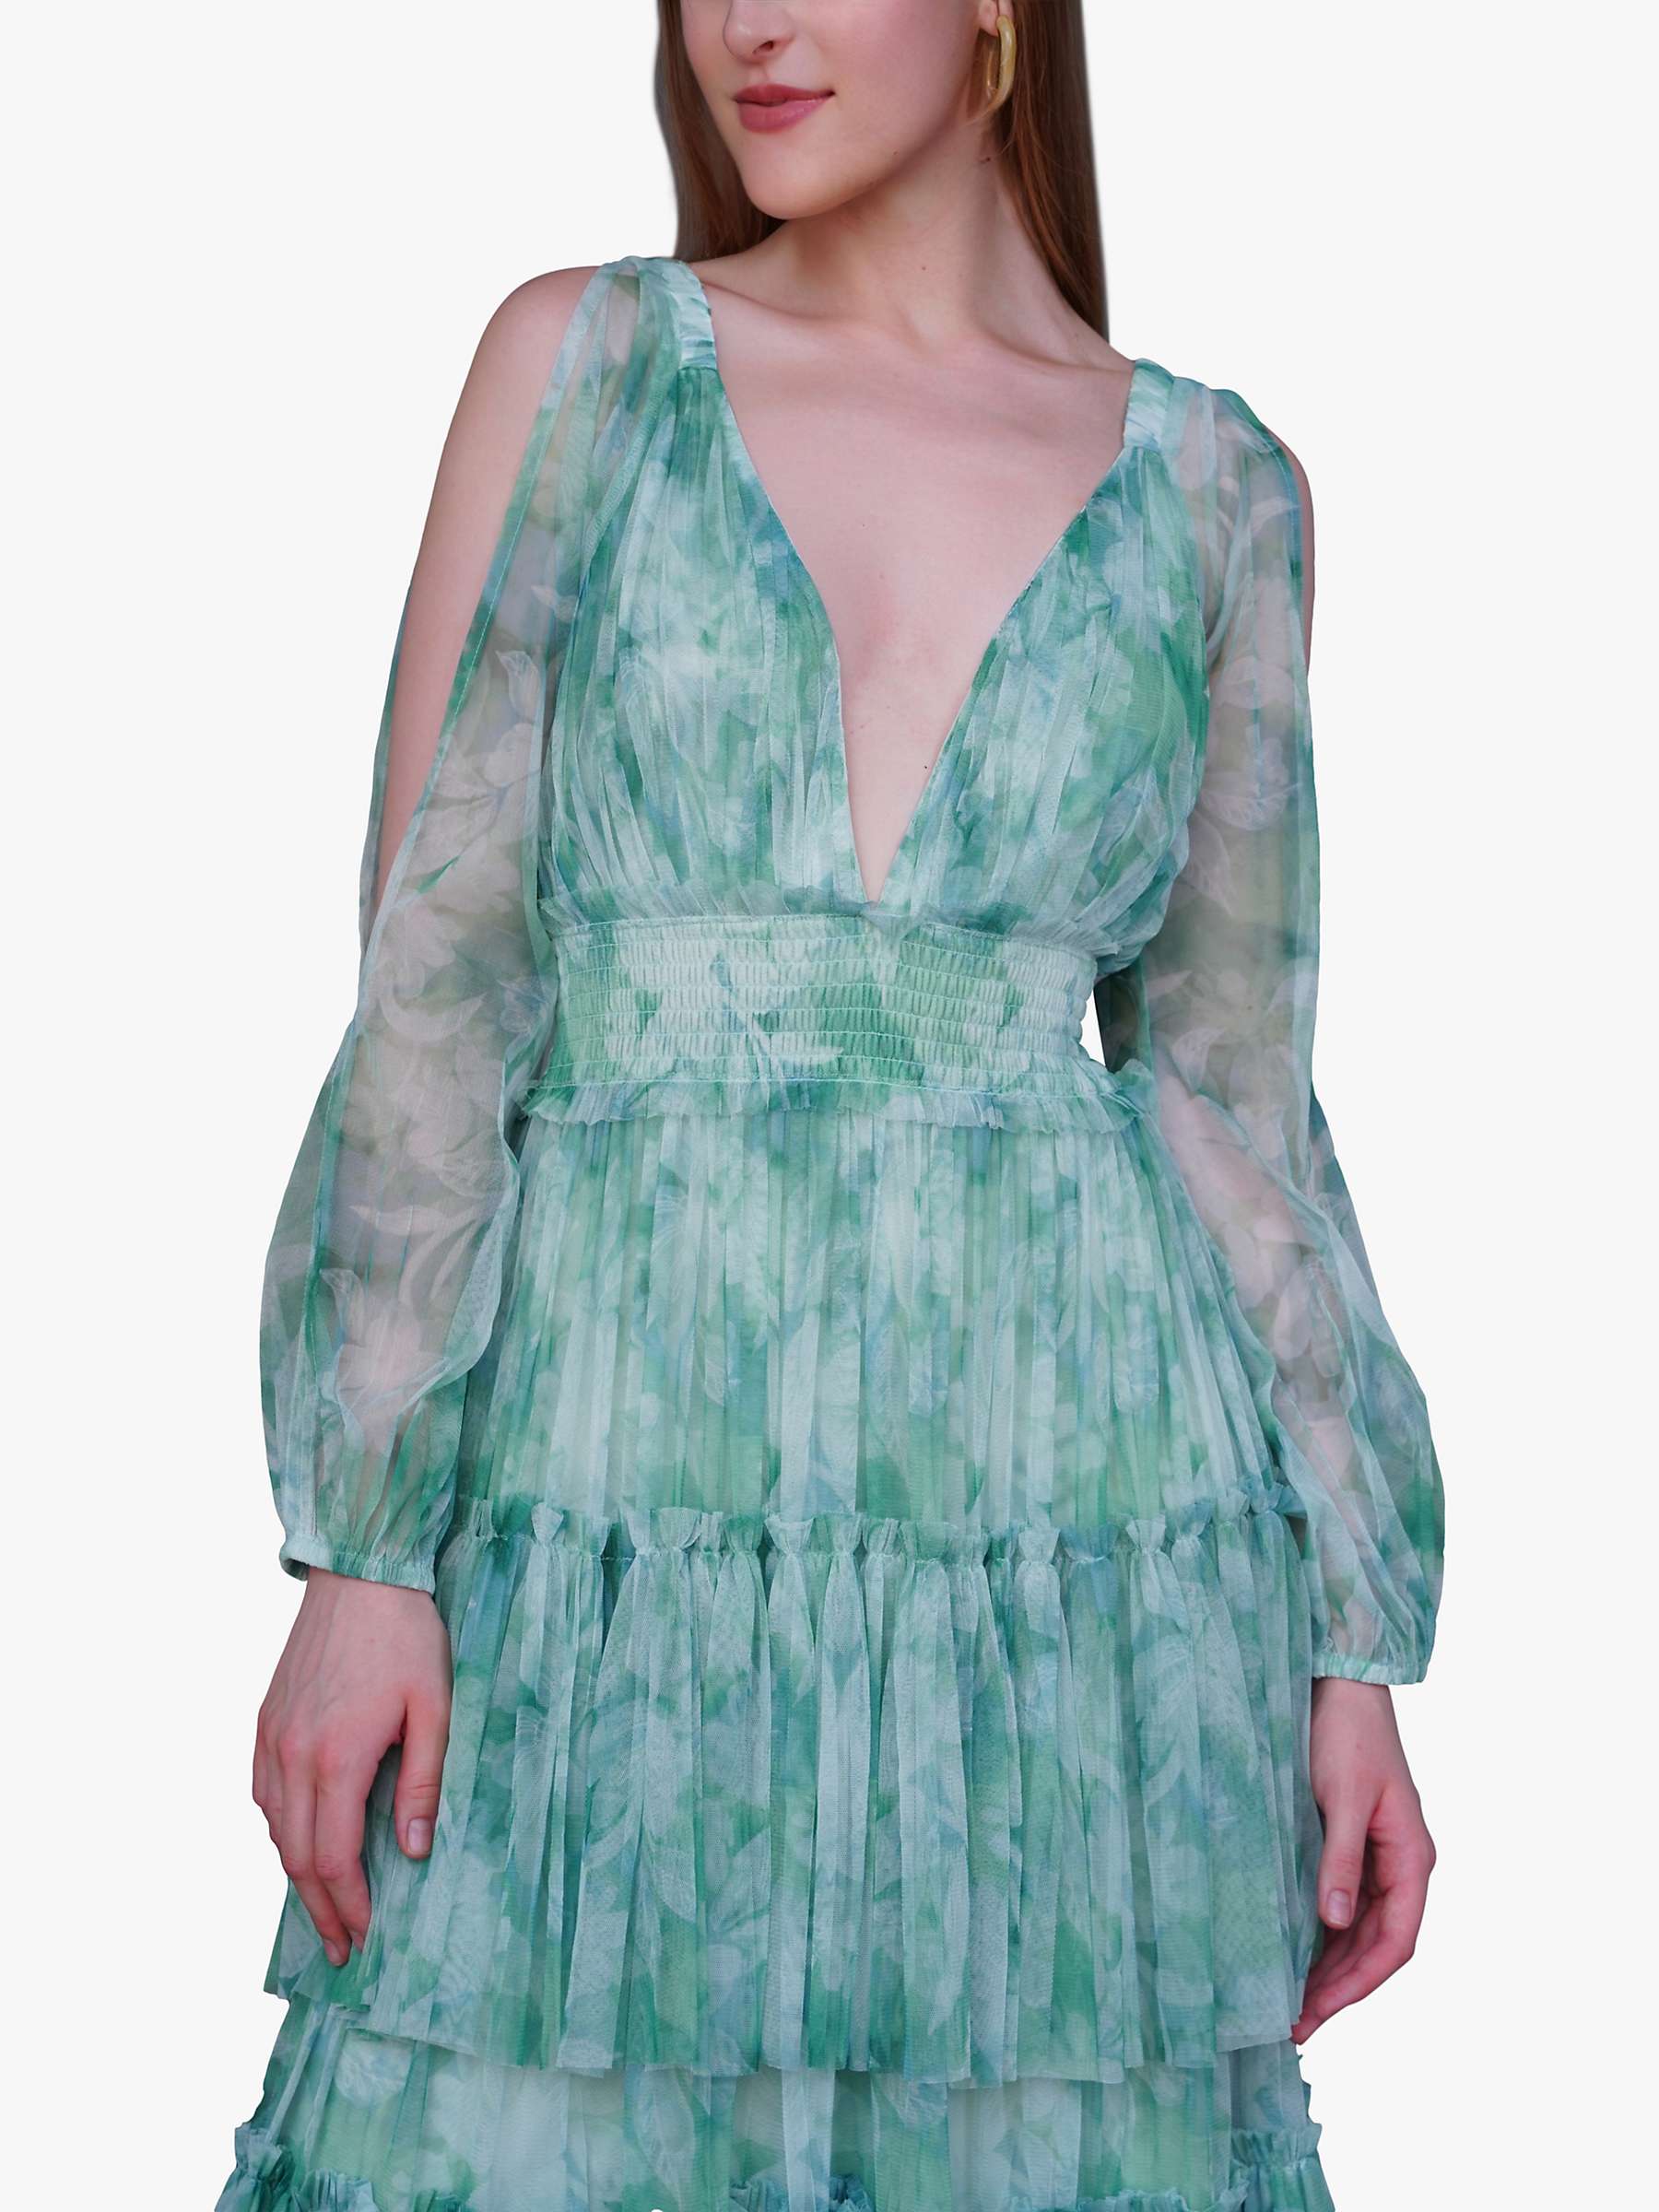 Buy Lace & Beads Selena Abstract Plunge Neck Maxi Dress, Green Online at johnlewis.com